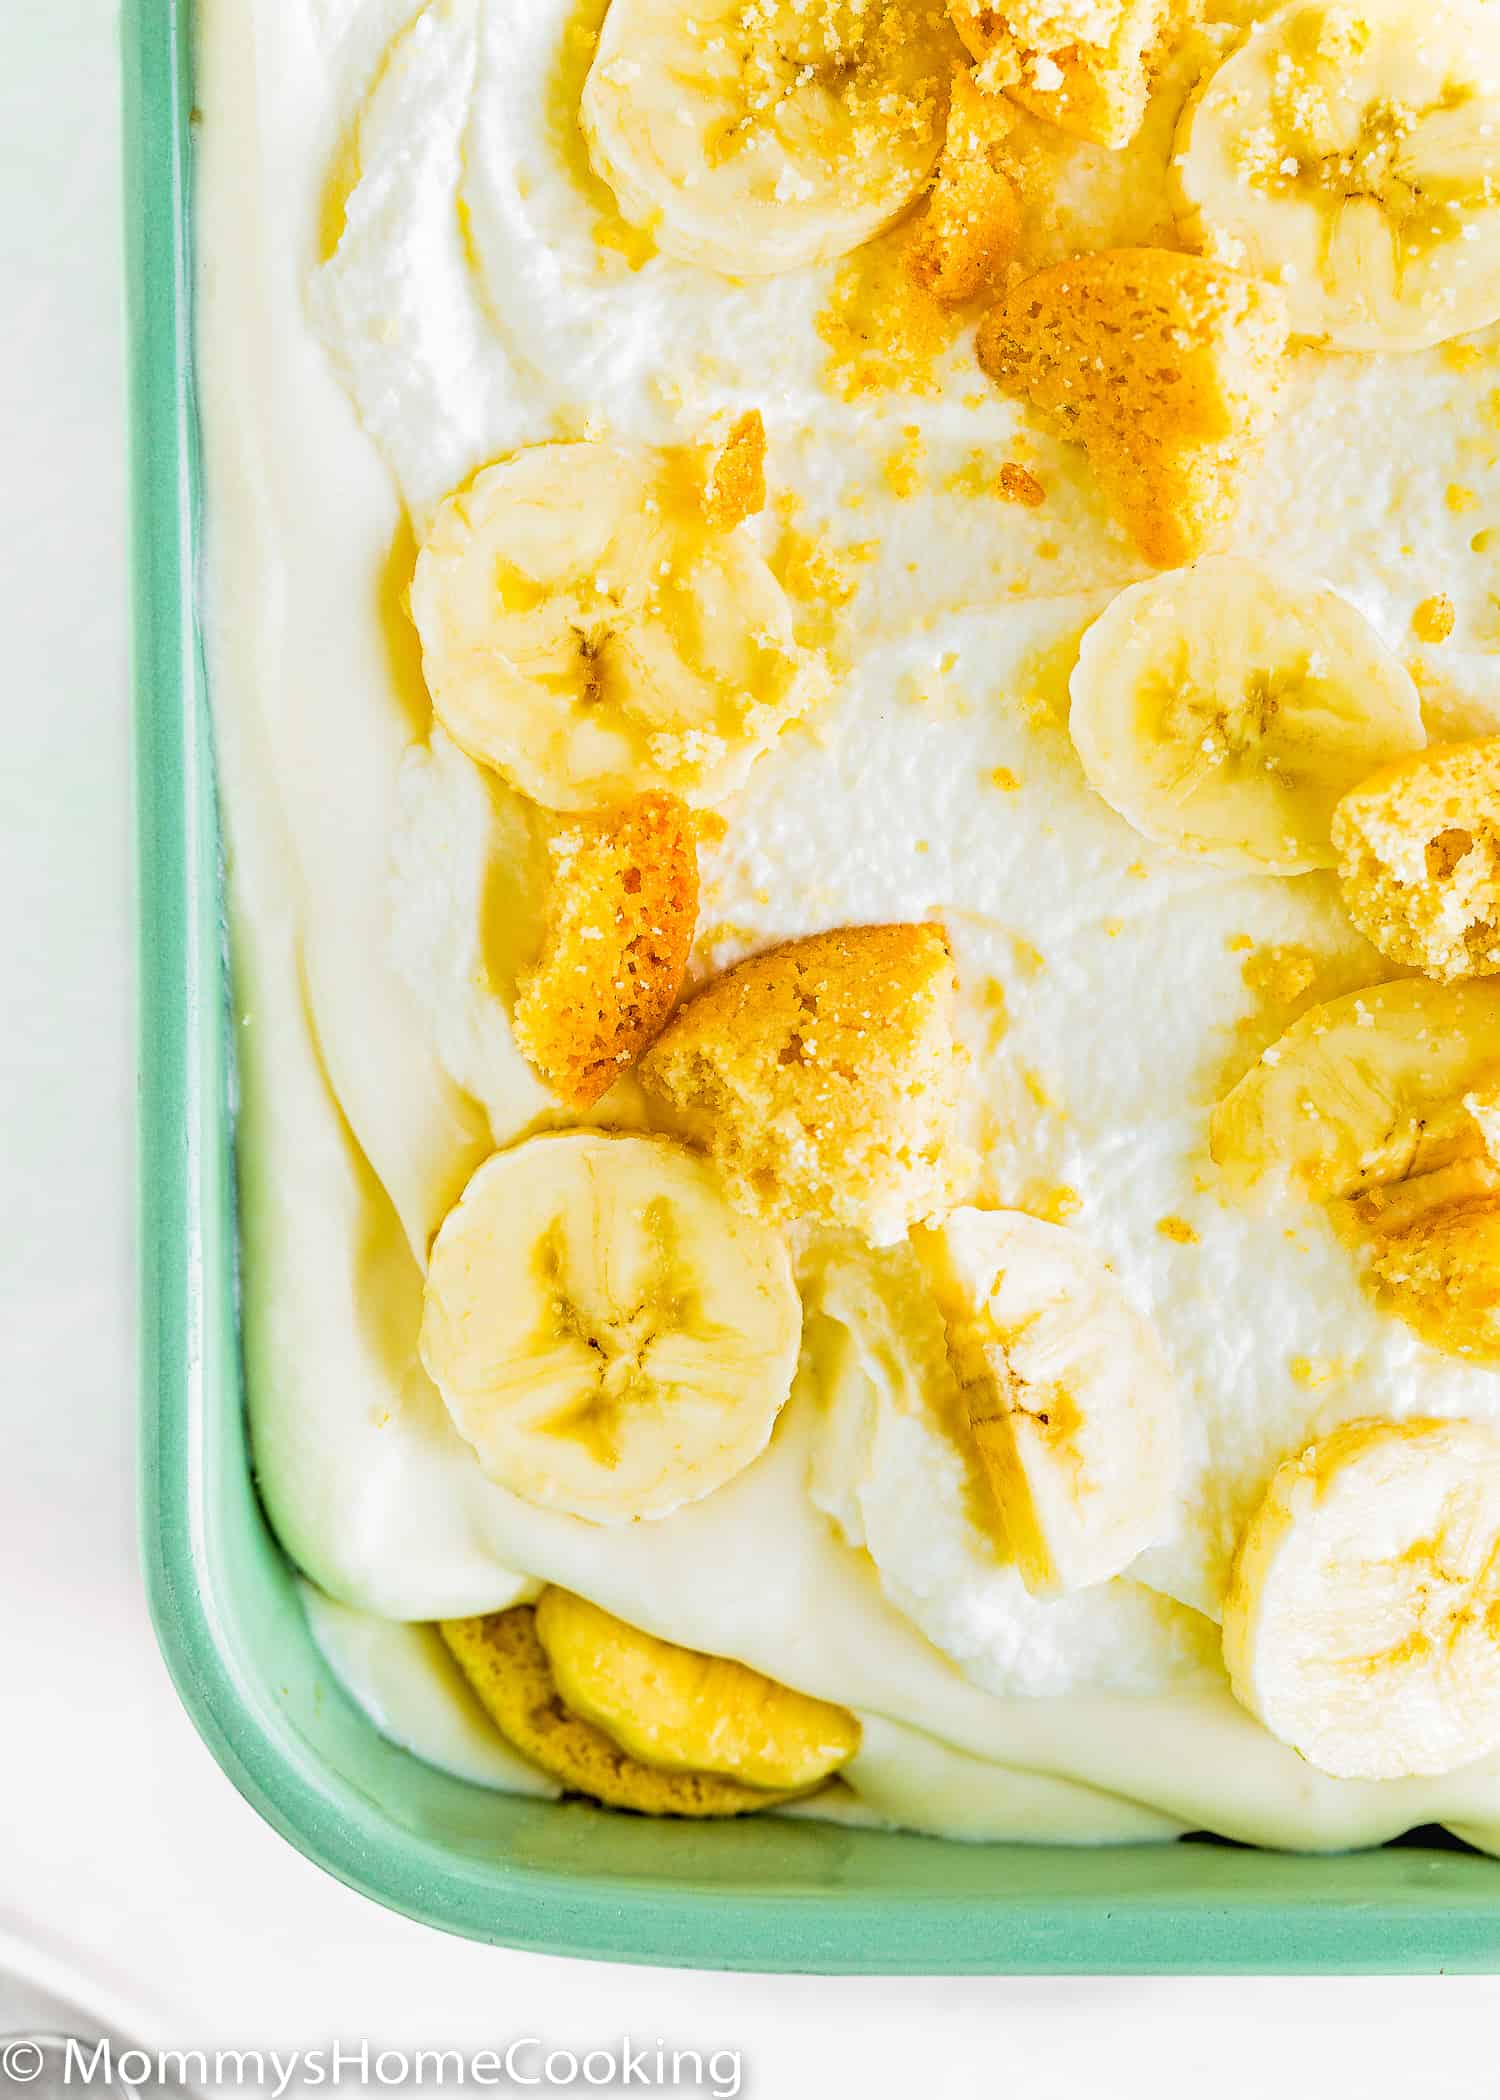 Egg-free banana pudding in a green dish showing its layers.